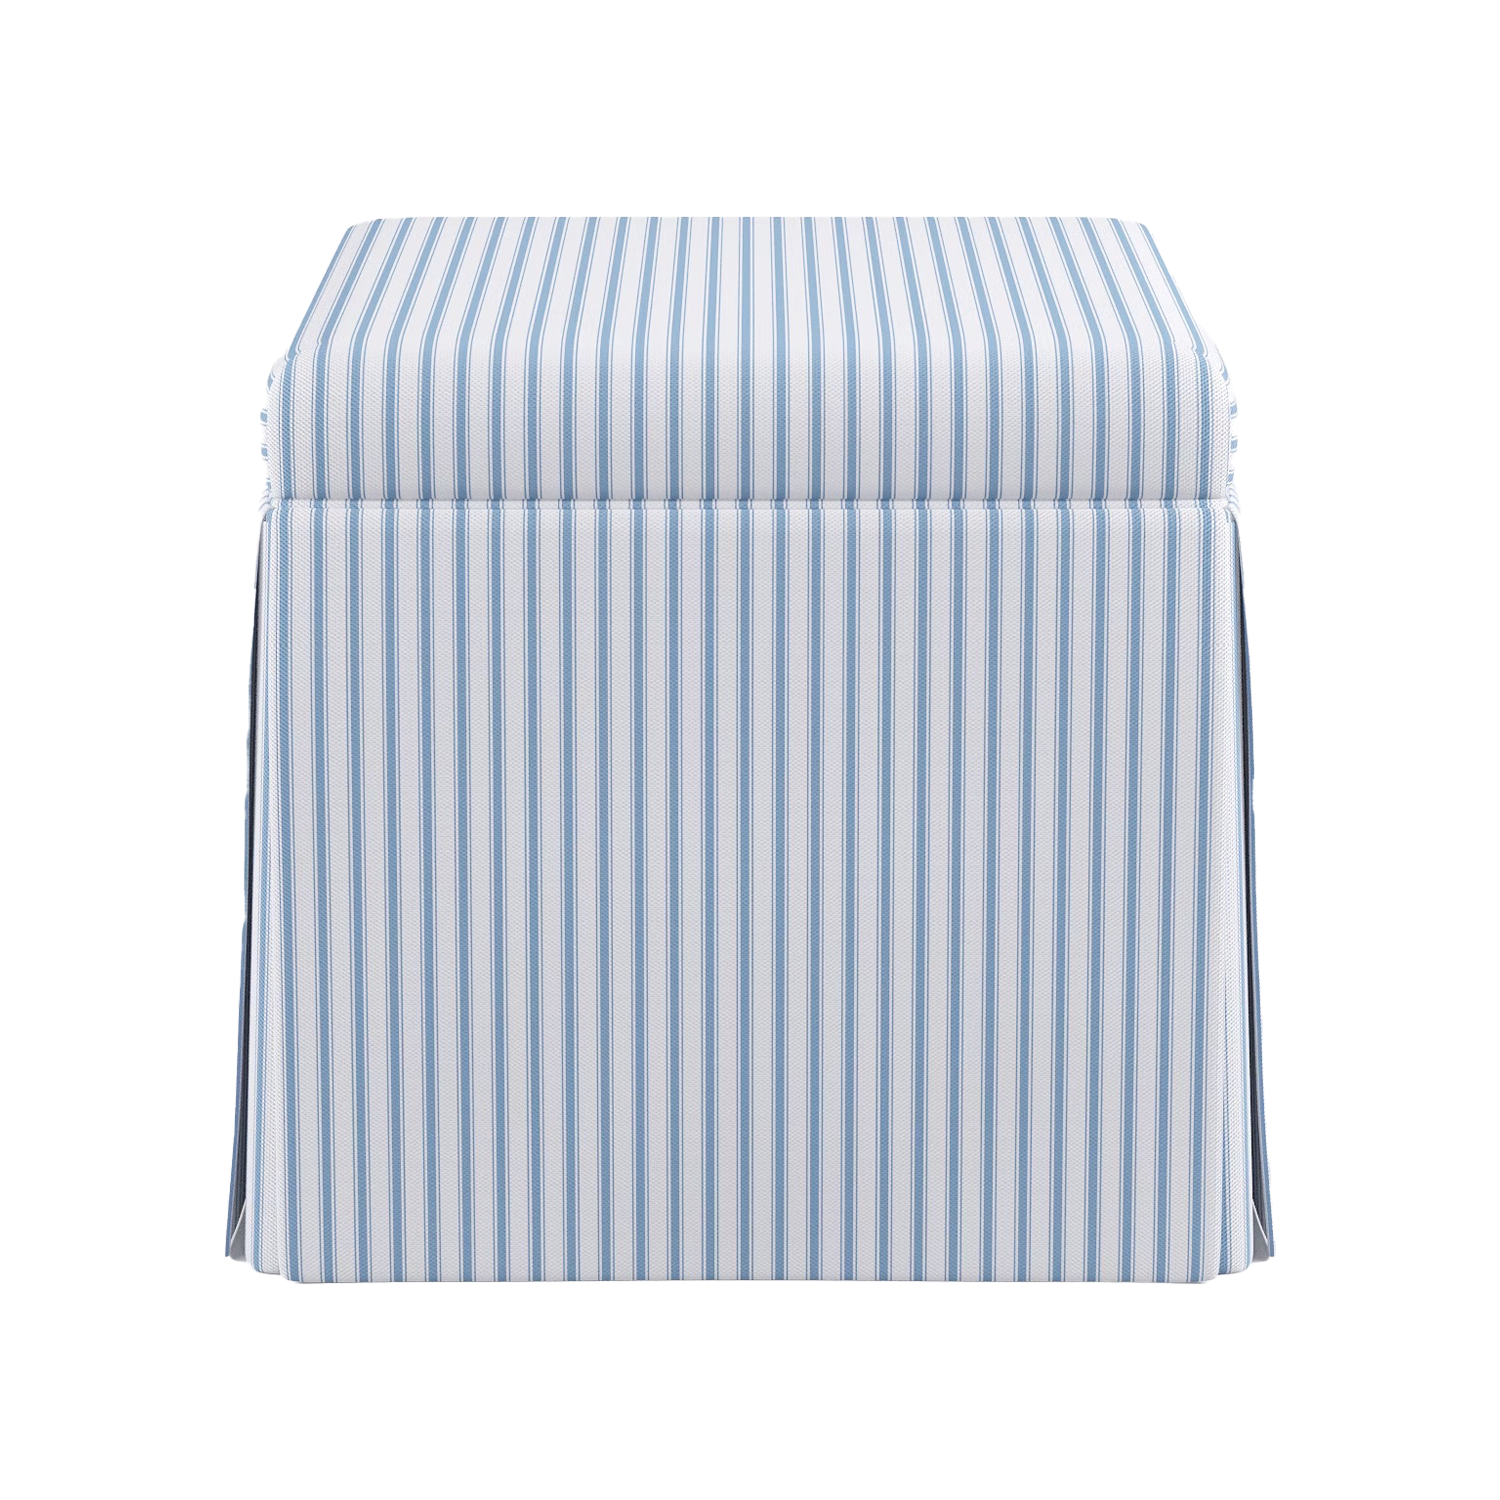 Striped Skirted Ottoman The Inside